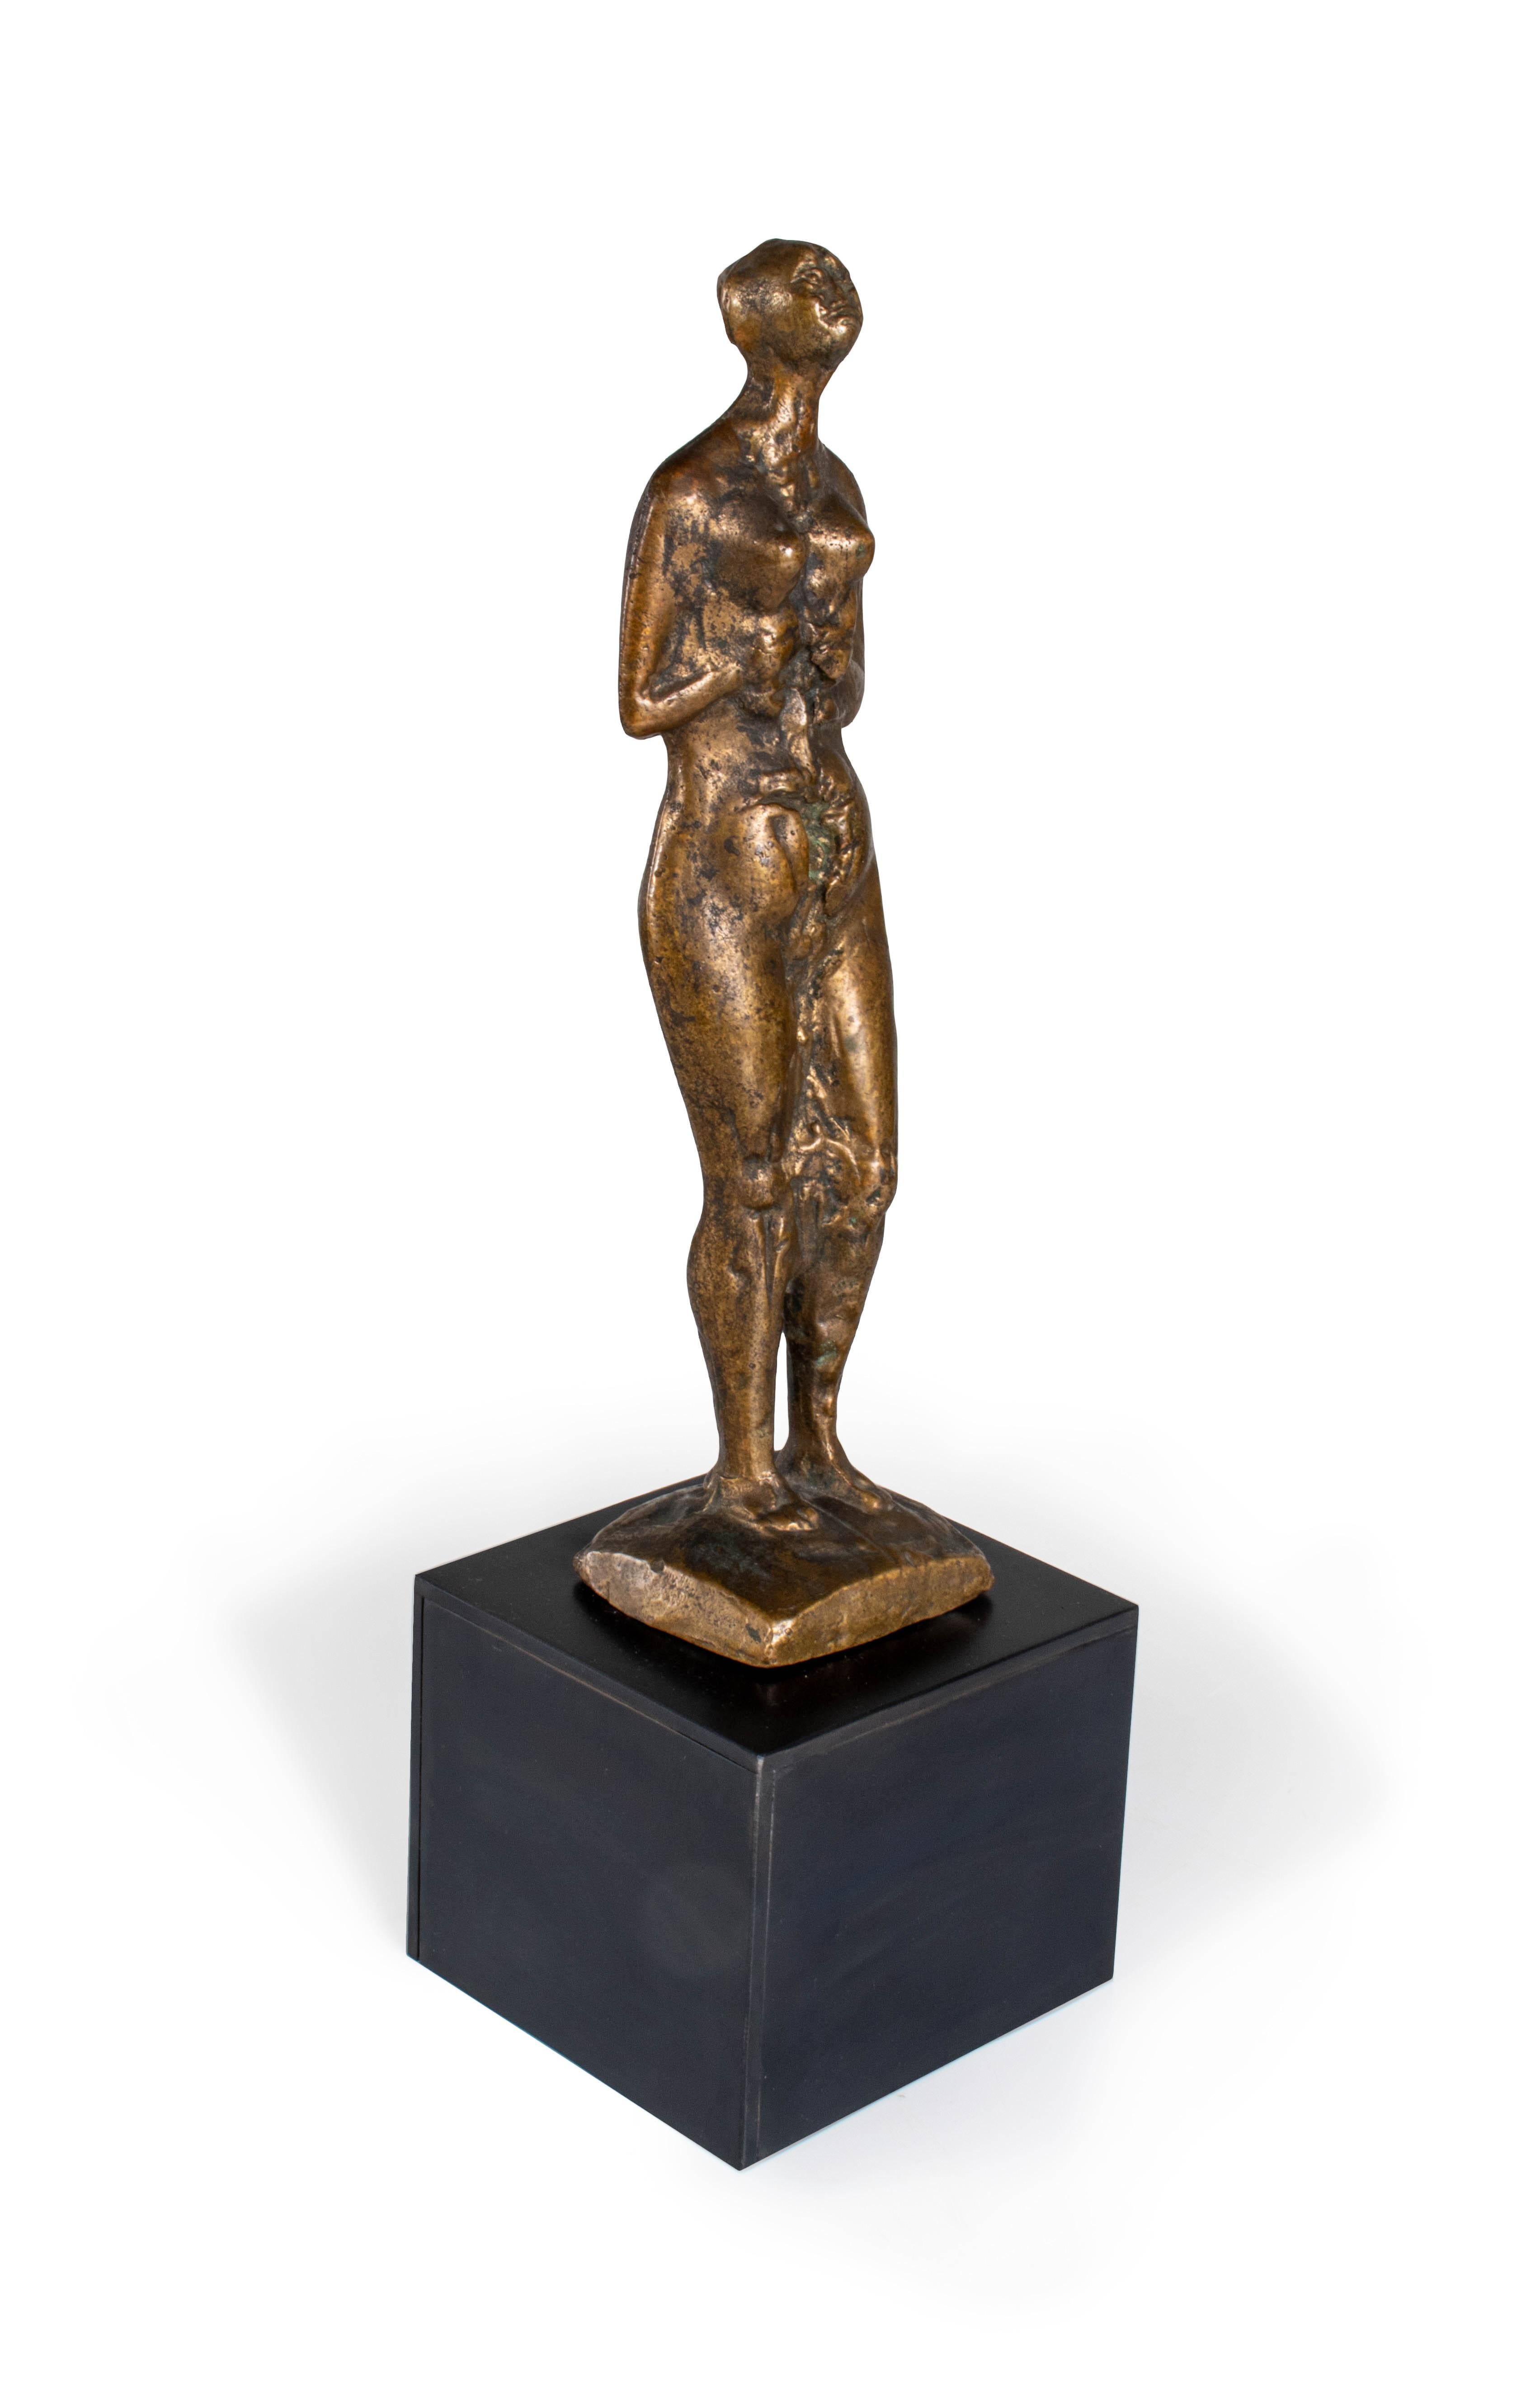 This statue is made of bronze and depicts a nude female figure. It's a beautiful piece of home decor that would complement any contemporary or vintage-inspired aesthetic. This statue is perfect for adding a touch of elegance to any home decor. The